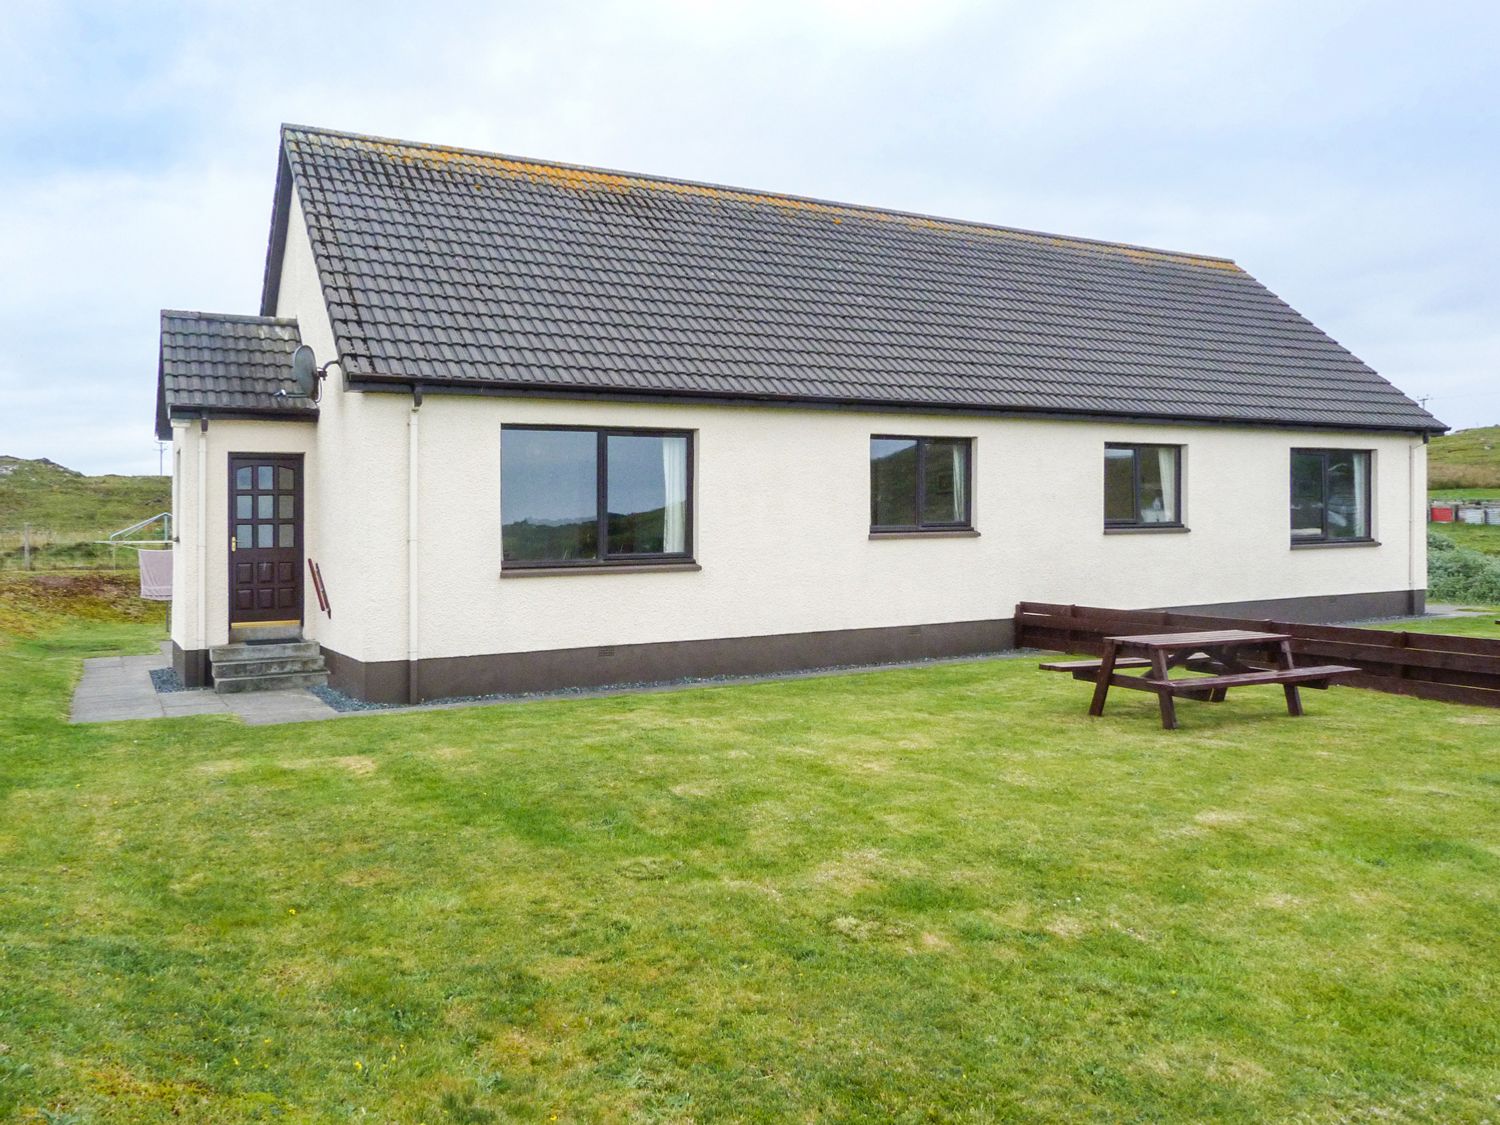 1 BAYVIEW BUNGALOW, Scotland, Scottish Highlands, Ross and Cromarty, Poolewe